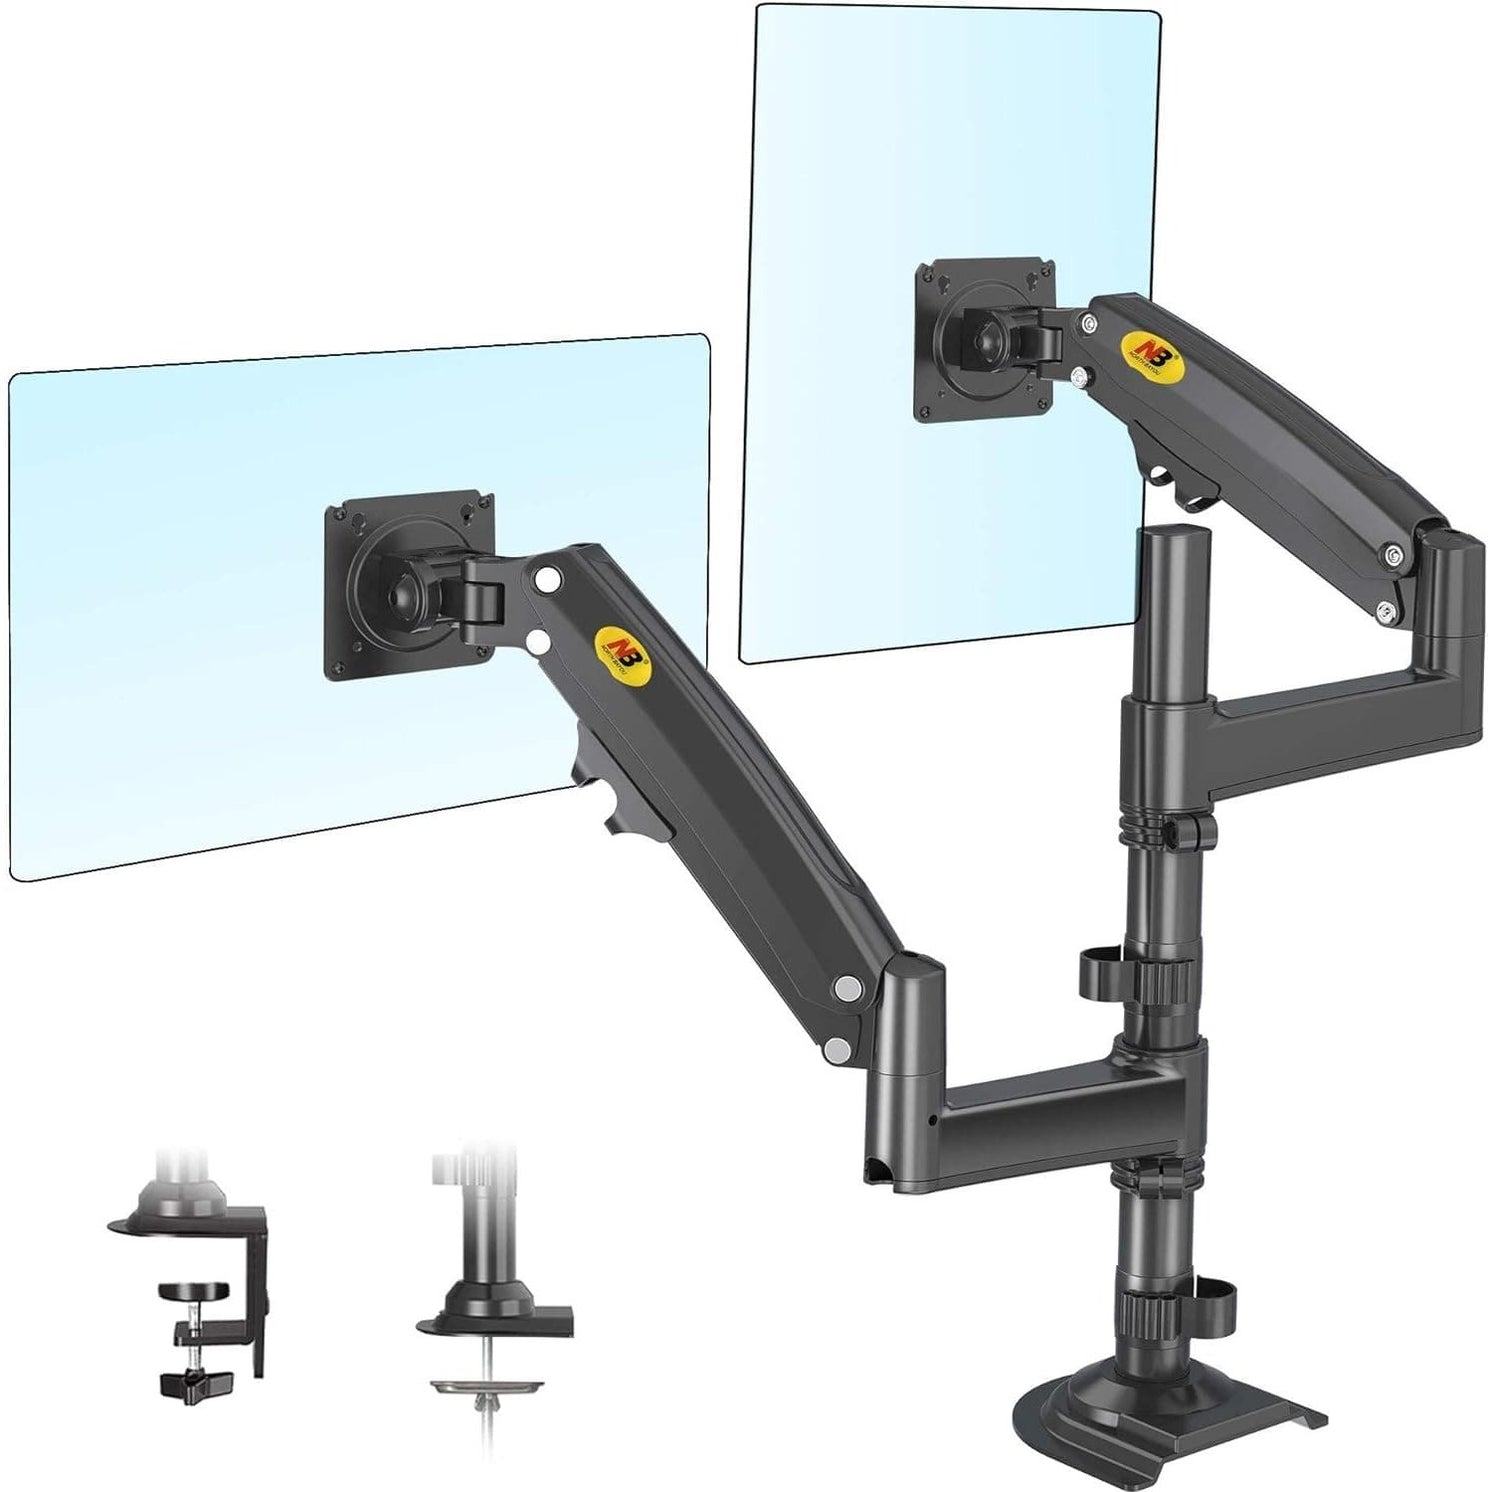 NB North Bayou Full Motion Swivel Dual Monitor Desk Mount Stand - H180 | Supply Master Accra, Ghana Home Accessories Buy Tools hardware Building materials